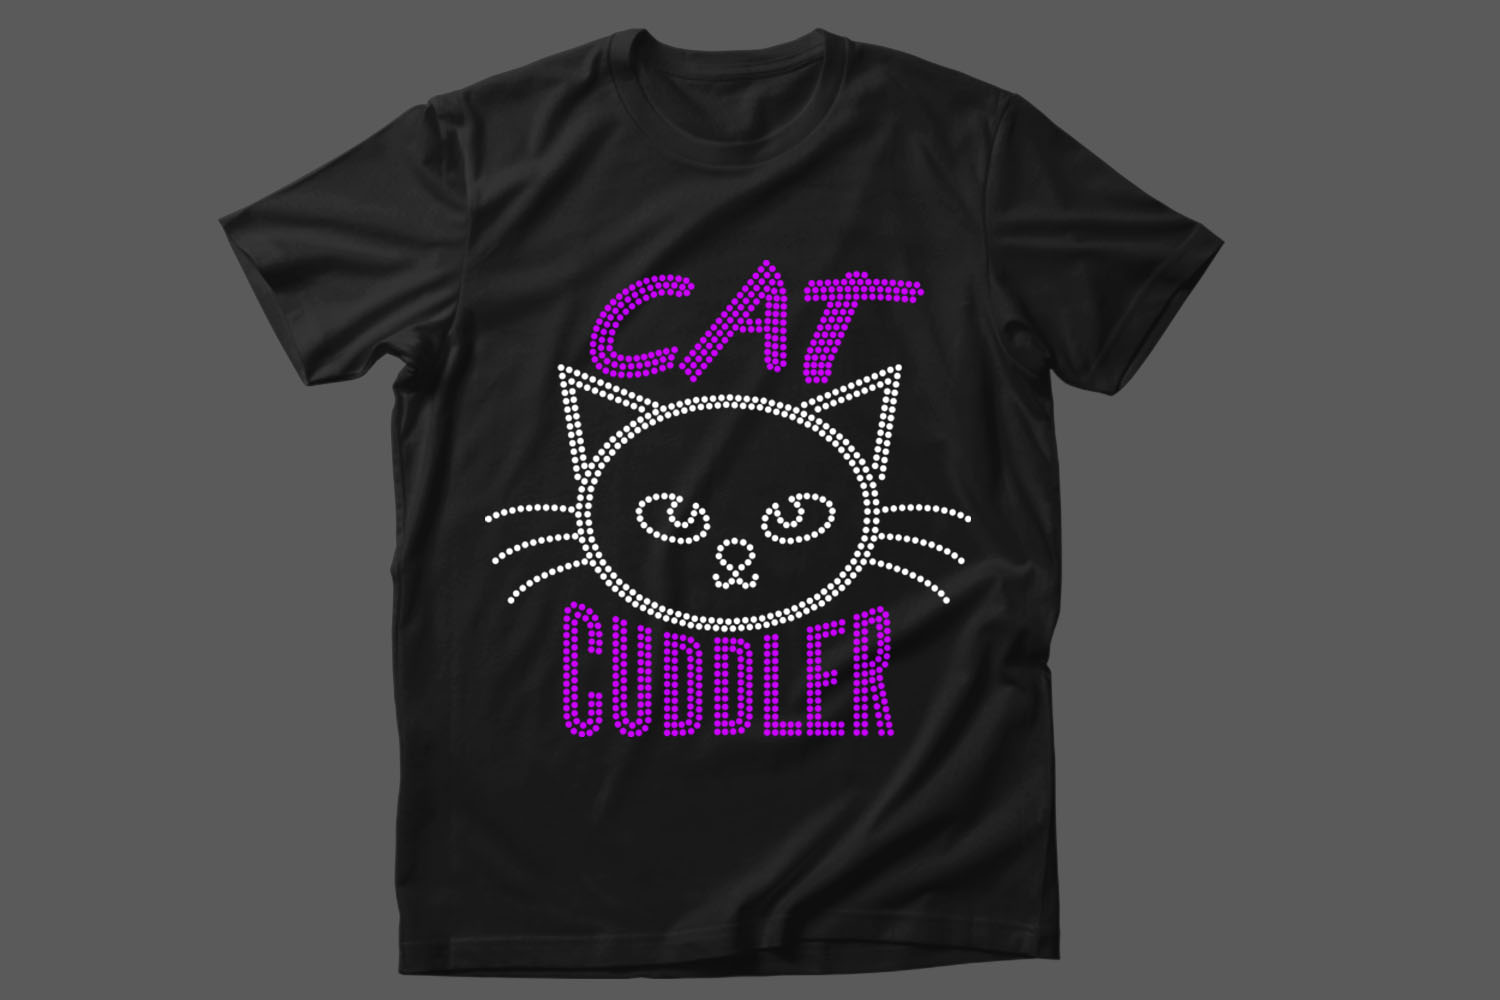 Image of a black t-shirt with the enchanting inscription Cat Cuddler